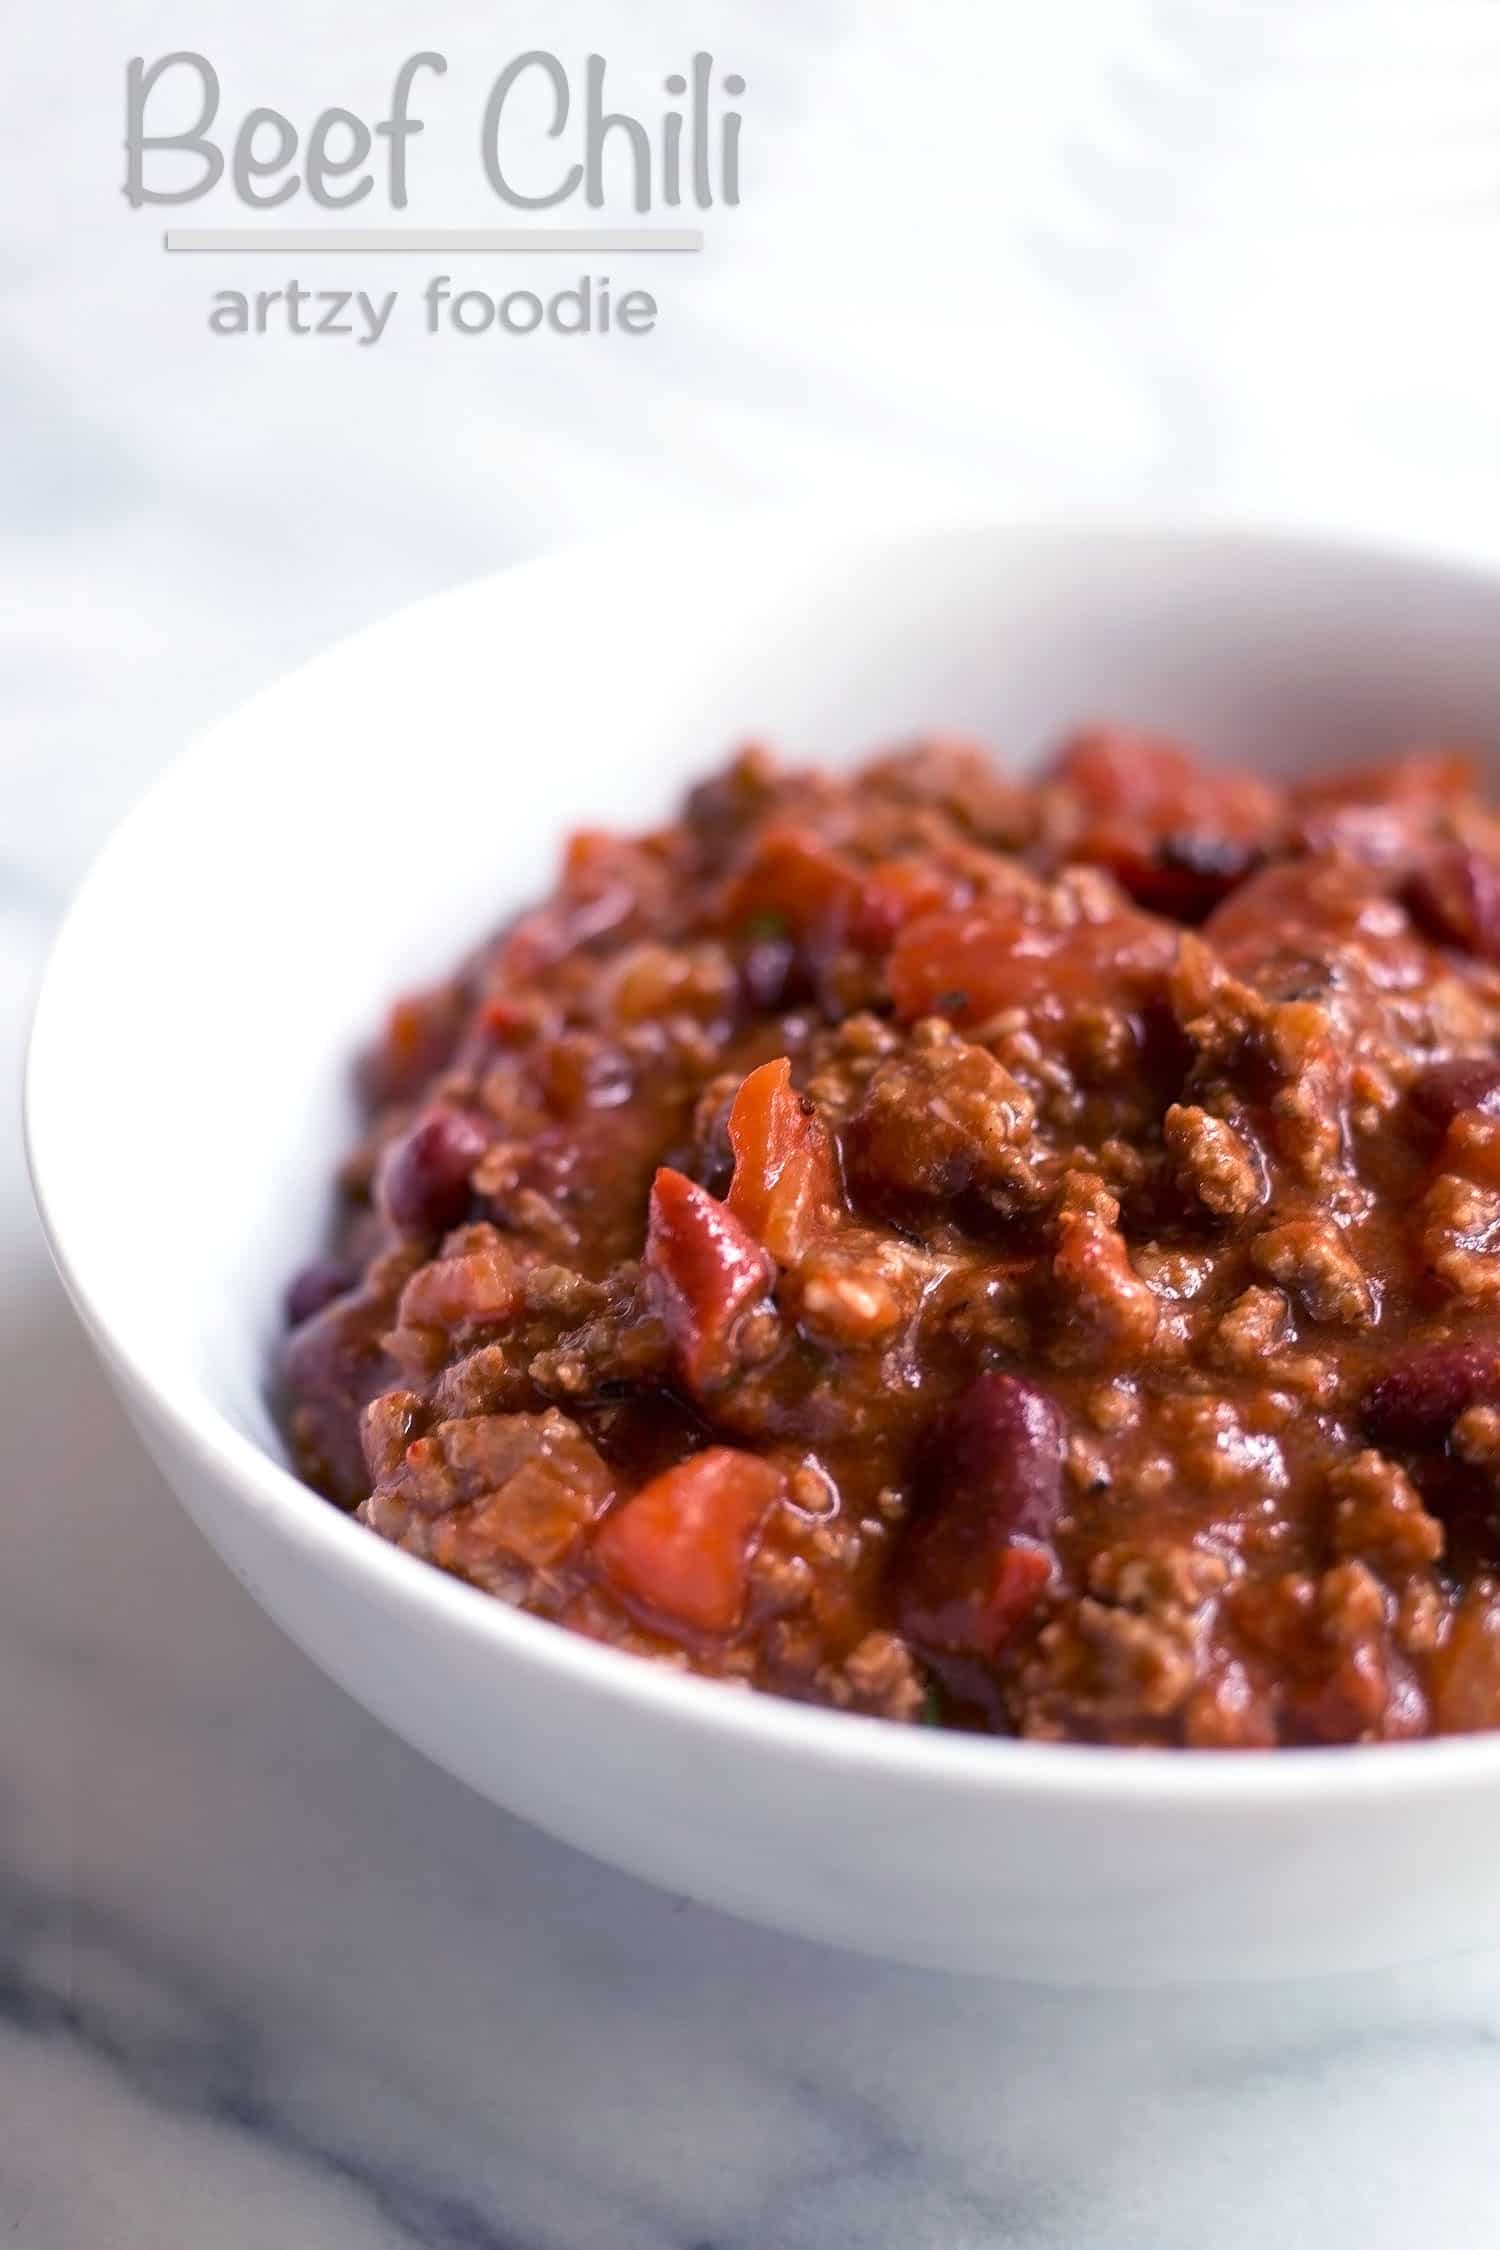 This beef chili is a bowl of thick, hearty, beefy, tomatoey, tangy goodness! |artzyfoodie.com|